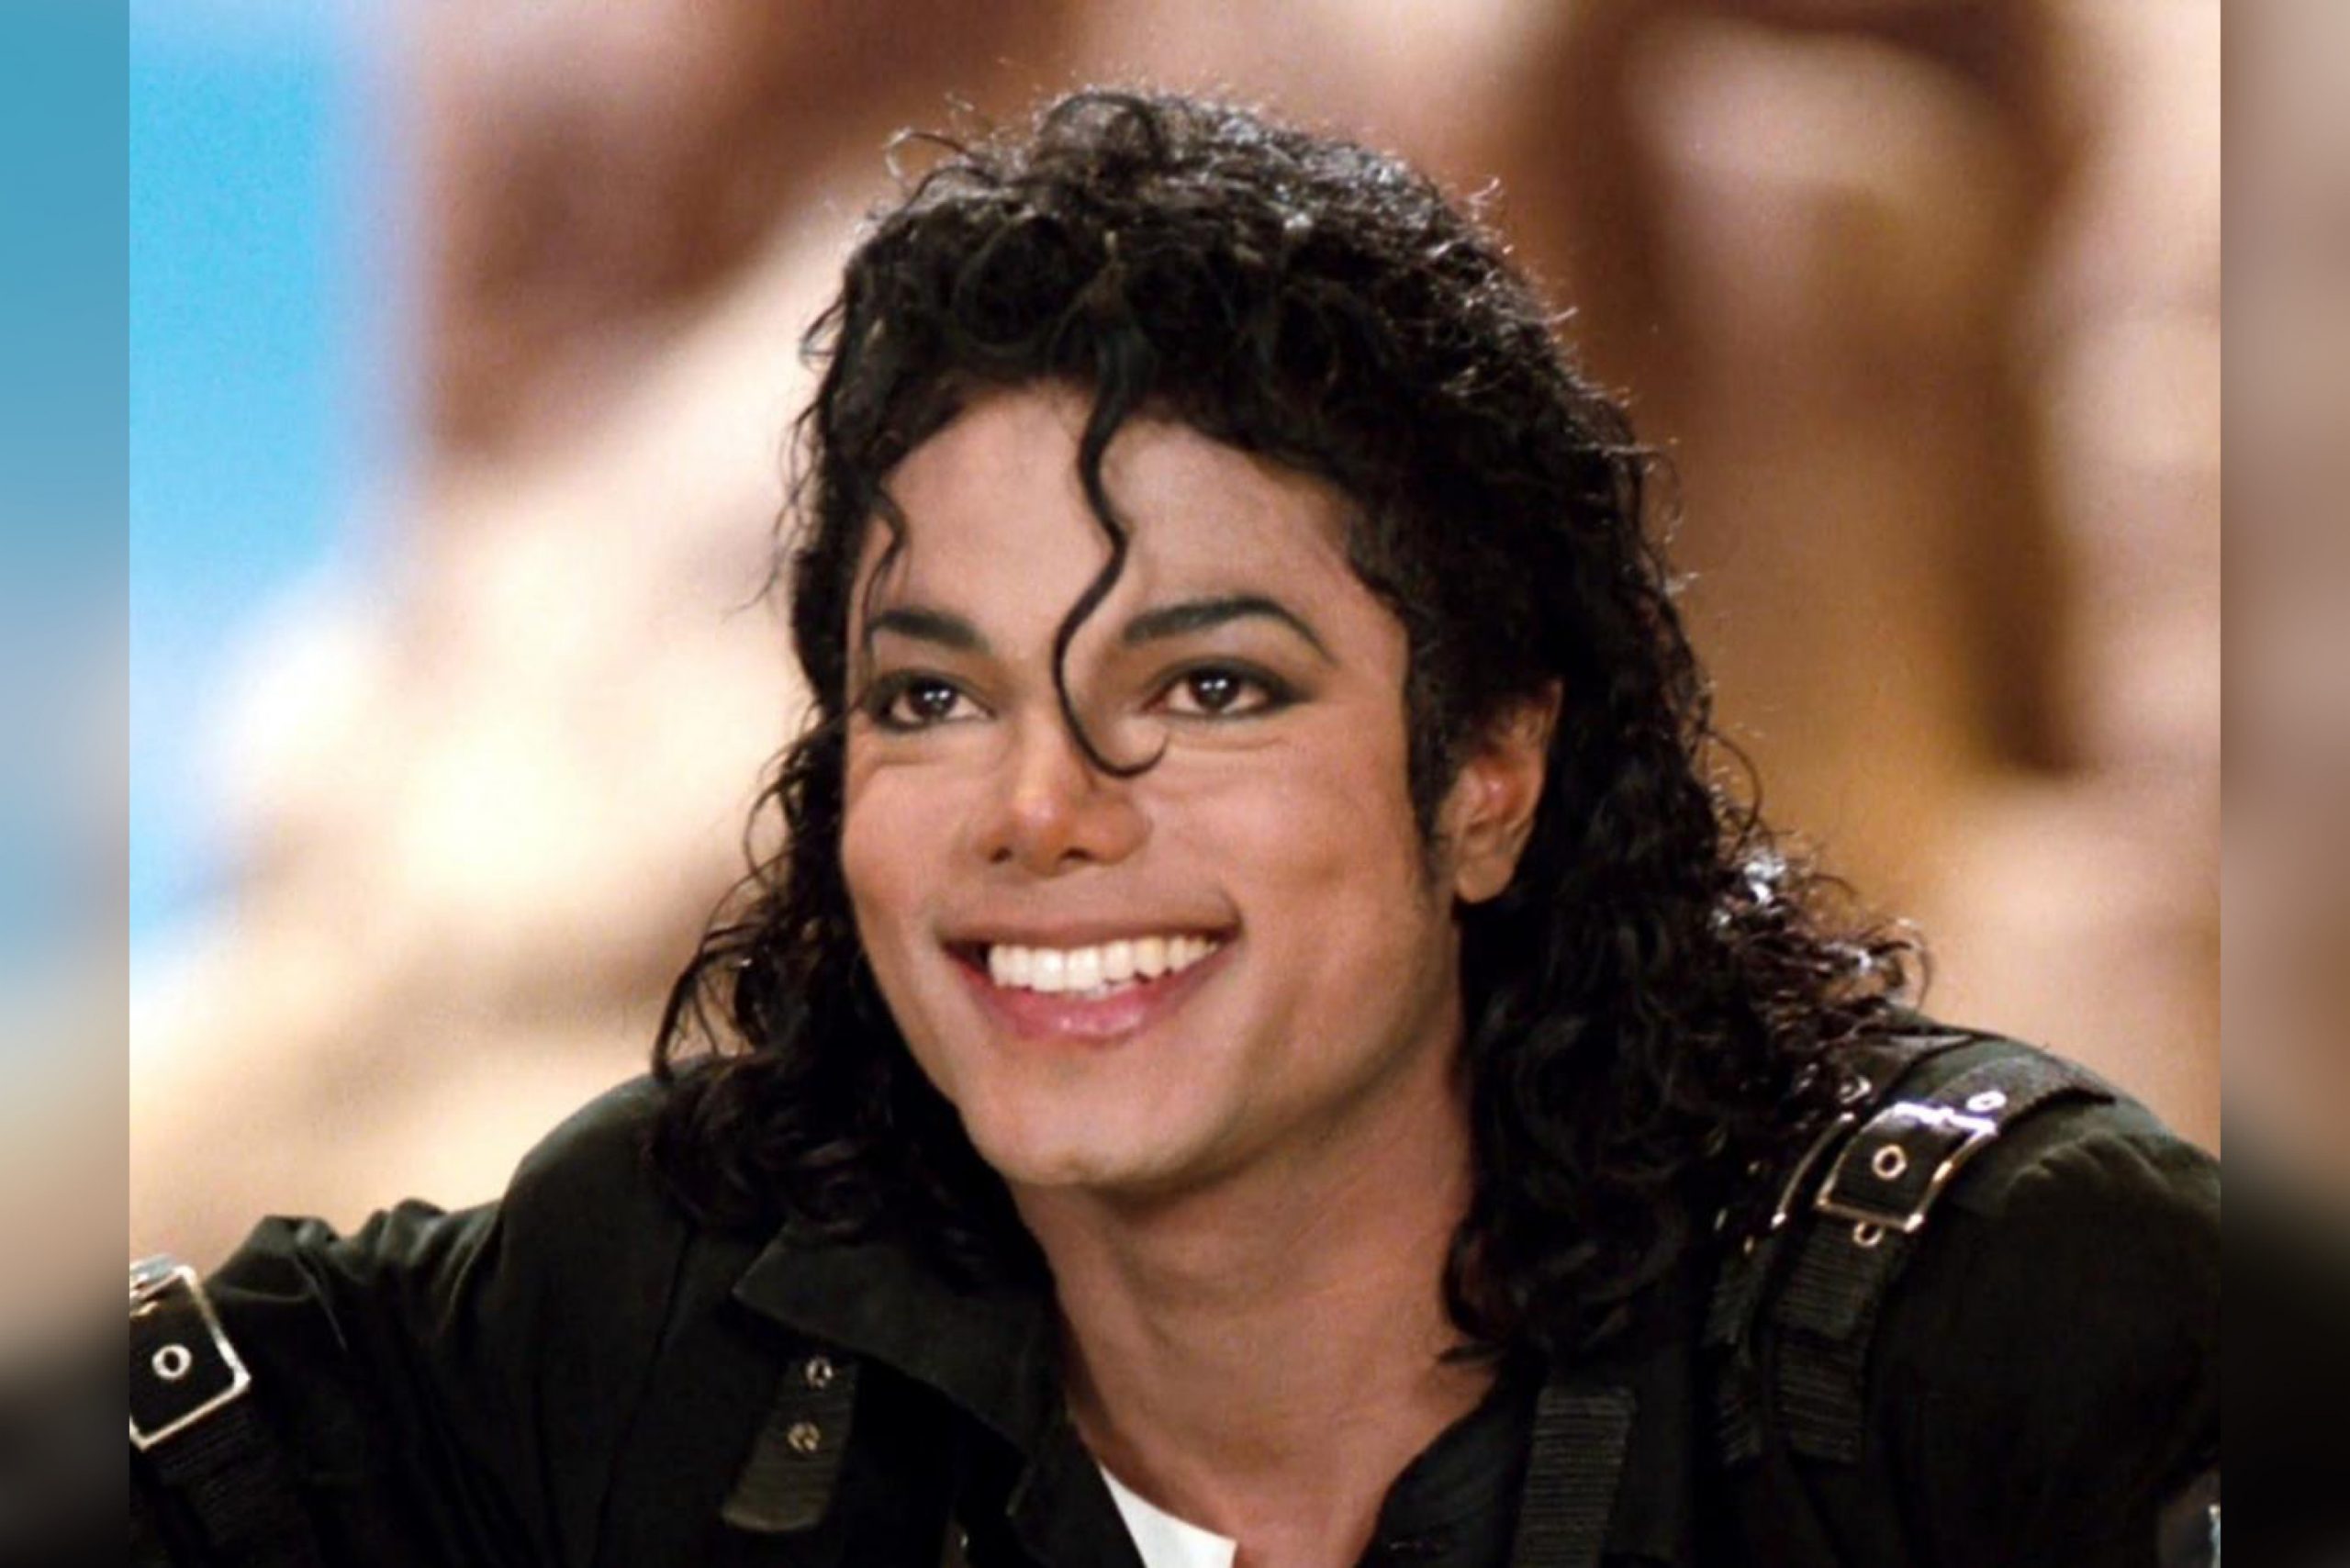 Michael Jackson’s Estate Looking To Sell 50% of His Music Catalog For Up To $900 Million